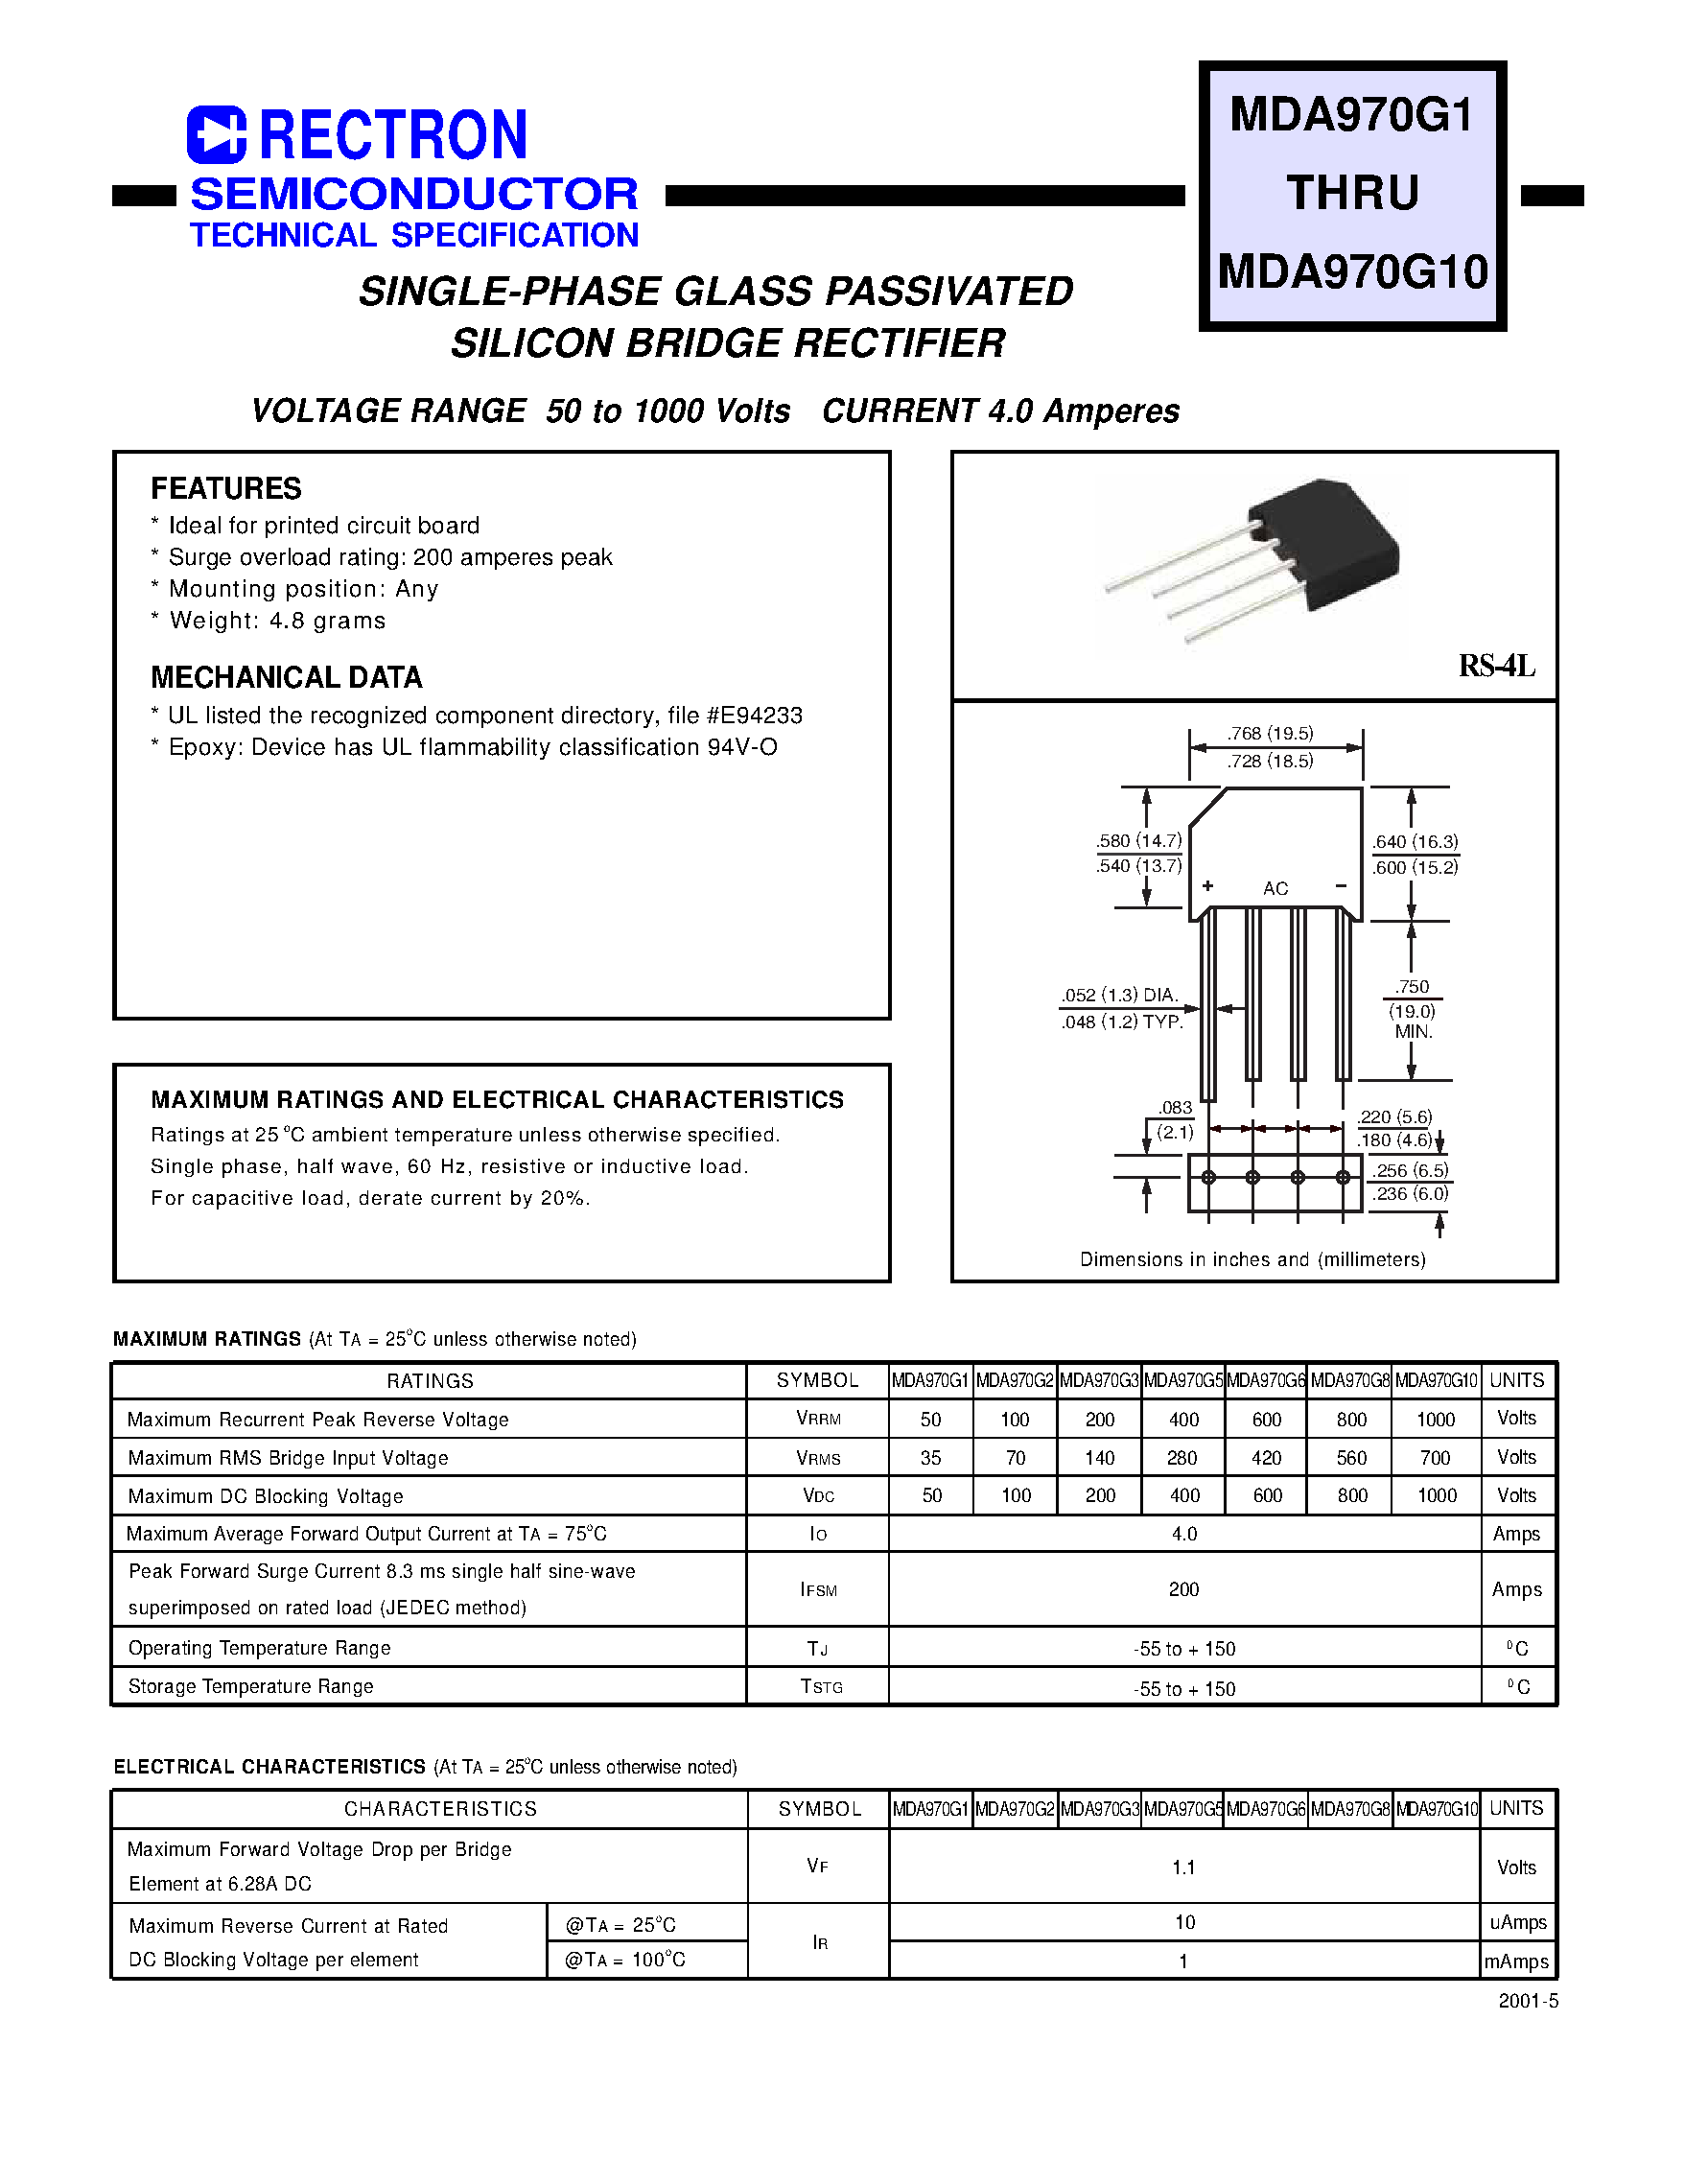 Даташит MDA970G2 - SINGLE-PHASE GLASS PASSIVATED SILICON BRIDGE RECTIFIER (VOLTAGE RANGE 50 to 1000 Volts CURRENT 4.0 Amperes) страница 1